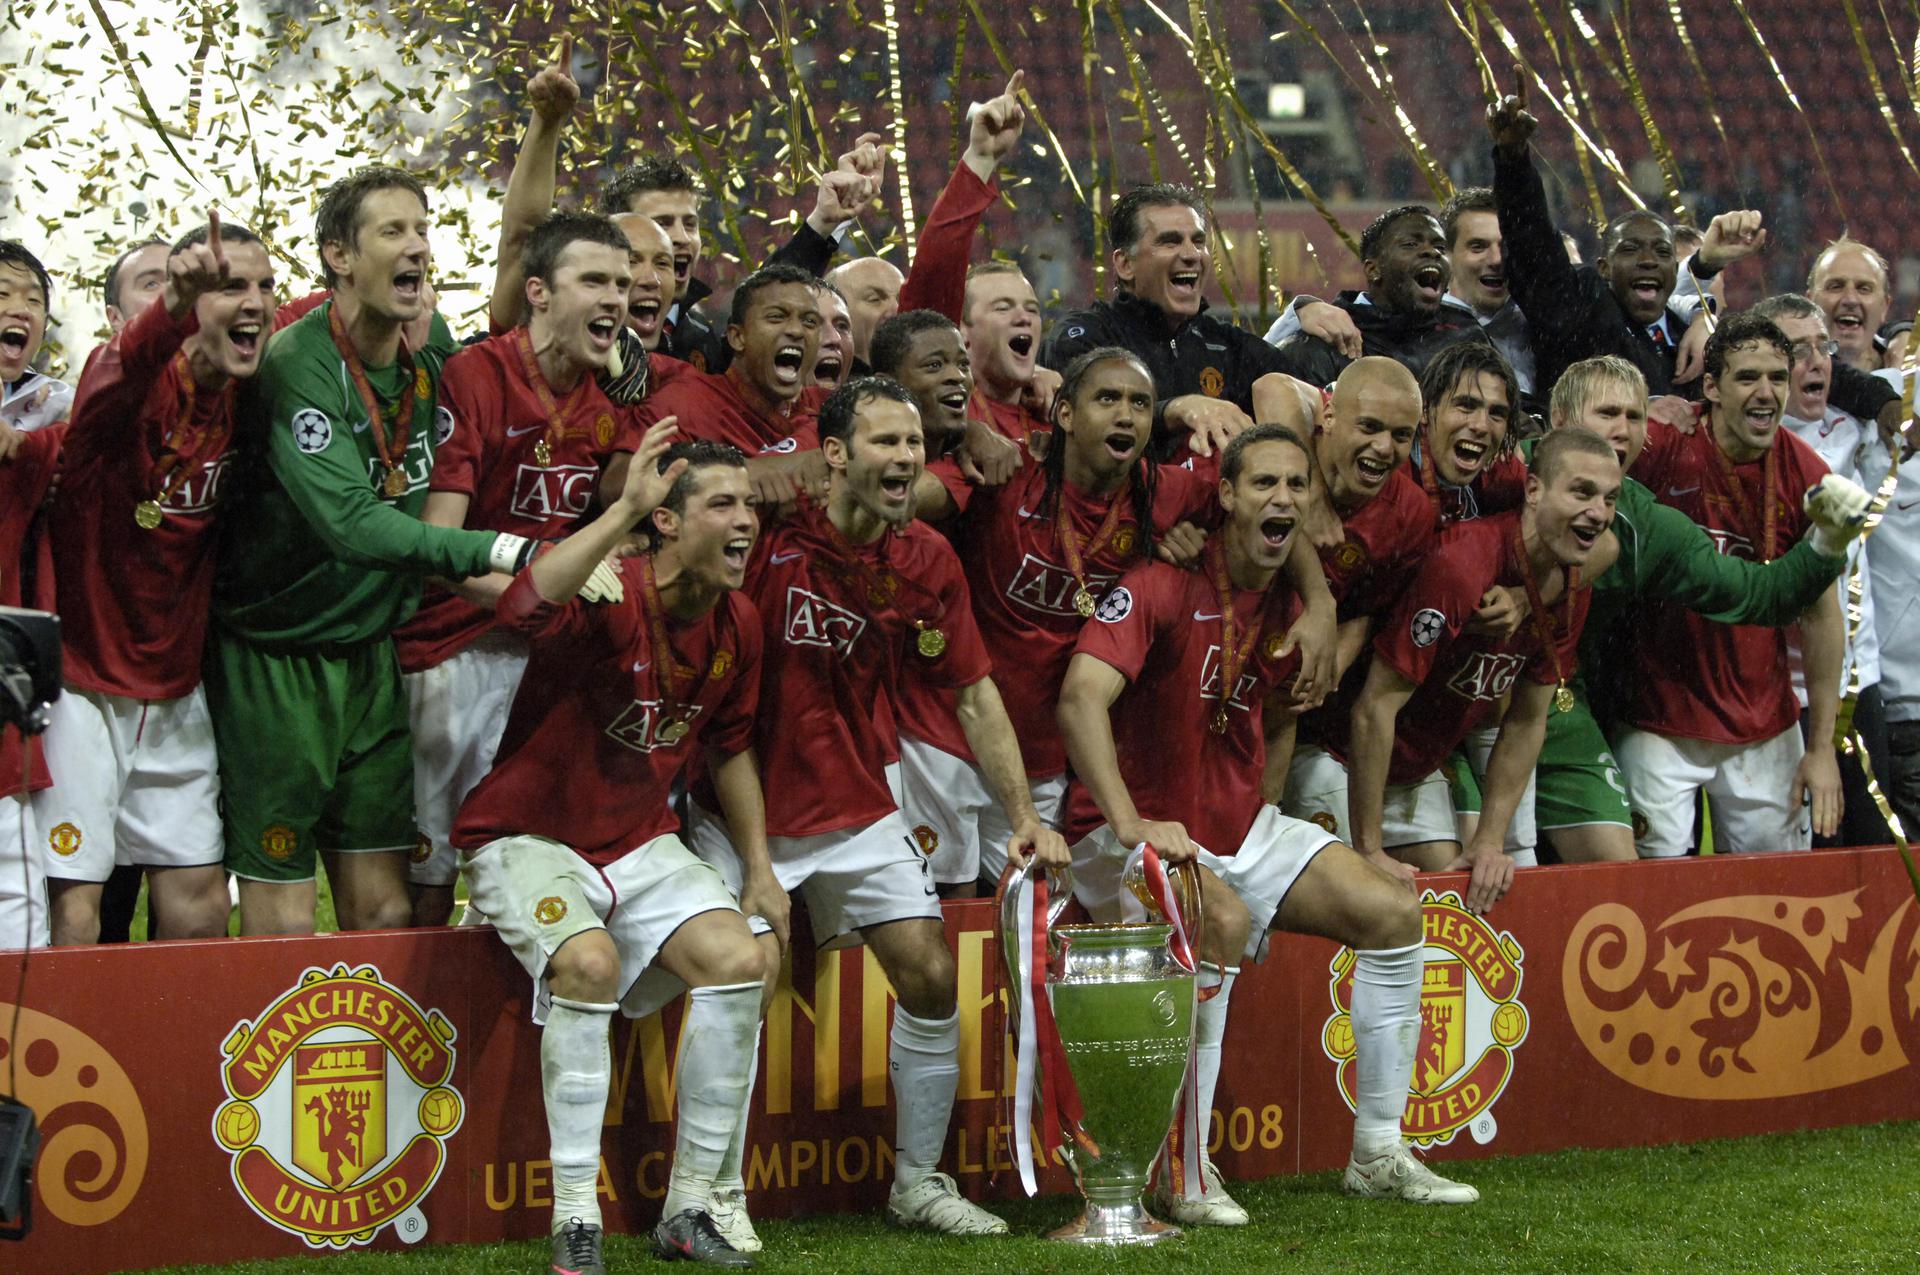 Gallery Champions League final 2008 | Manchester United